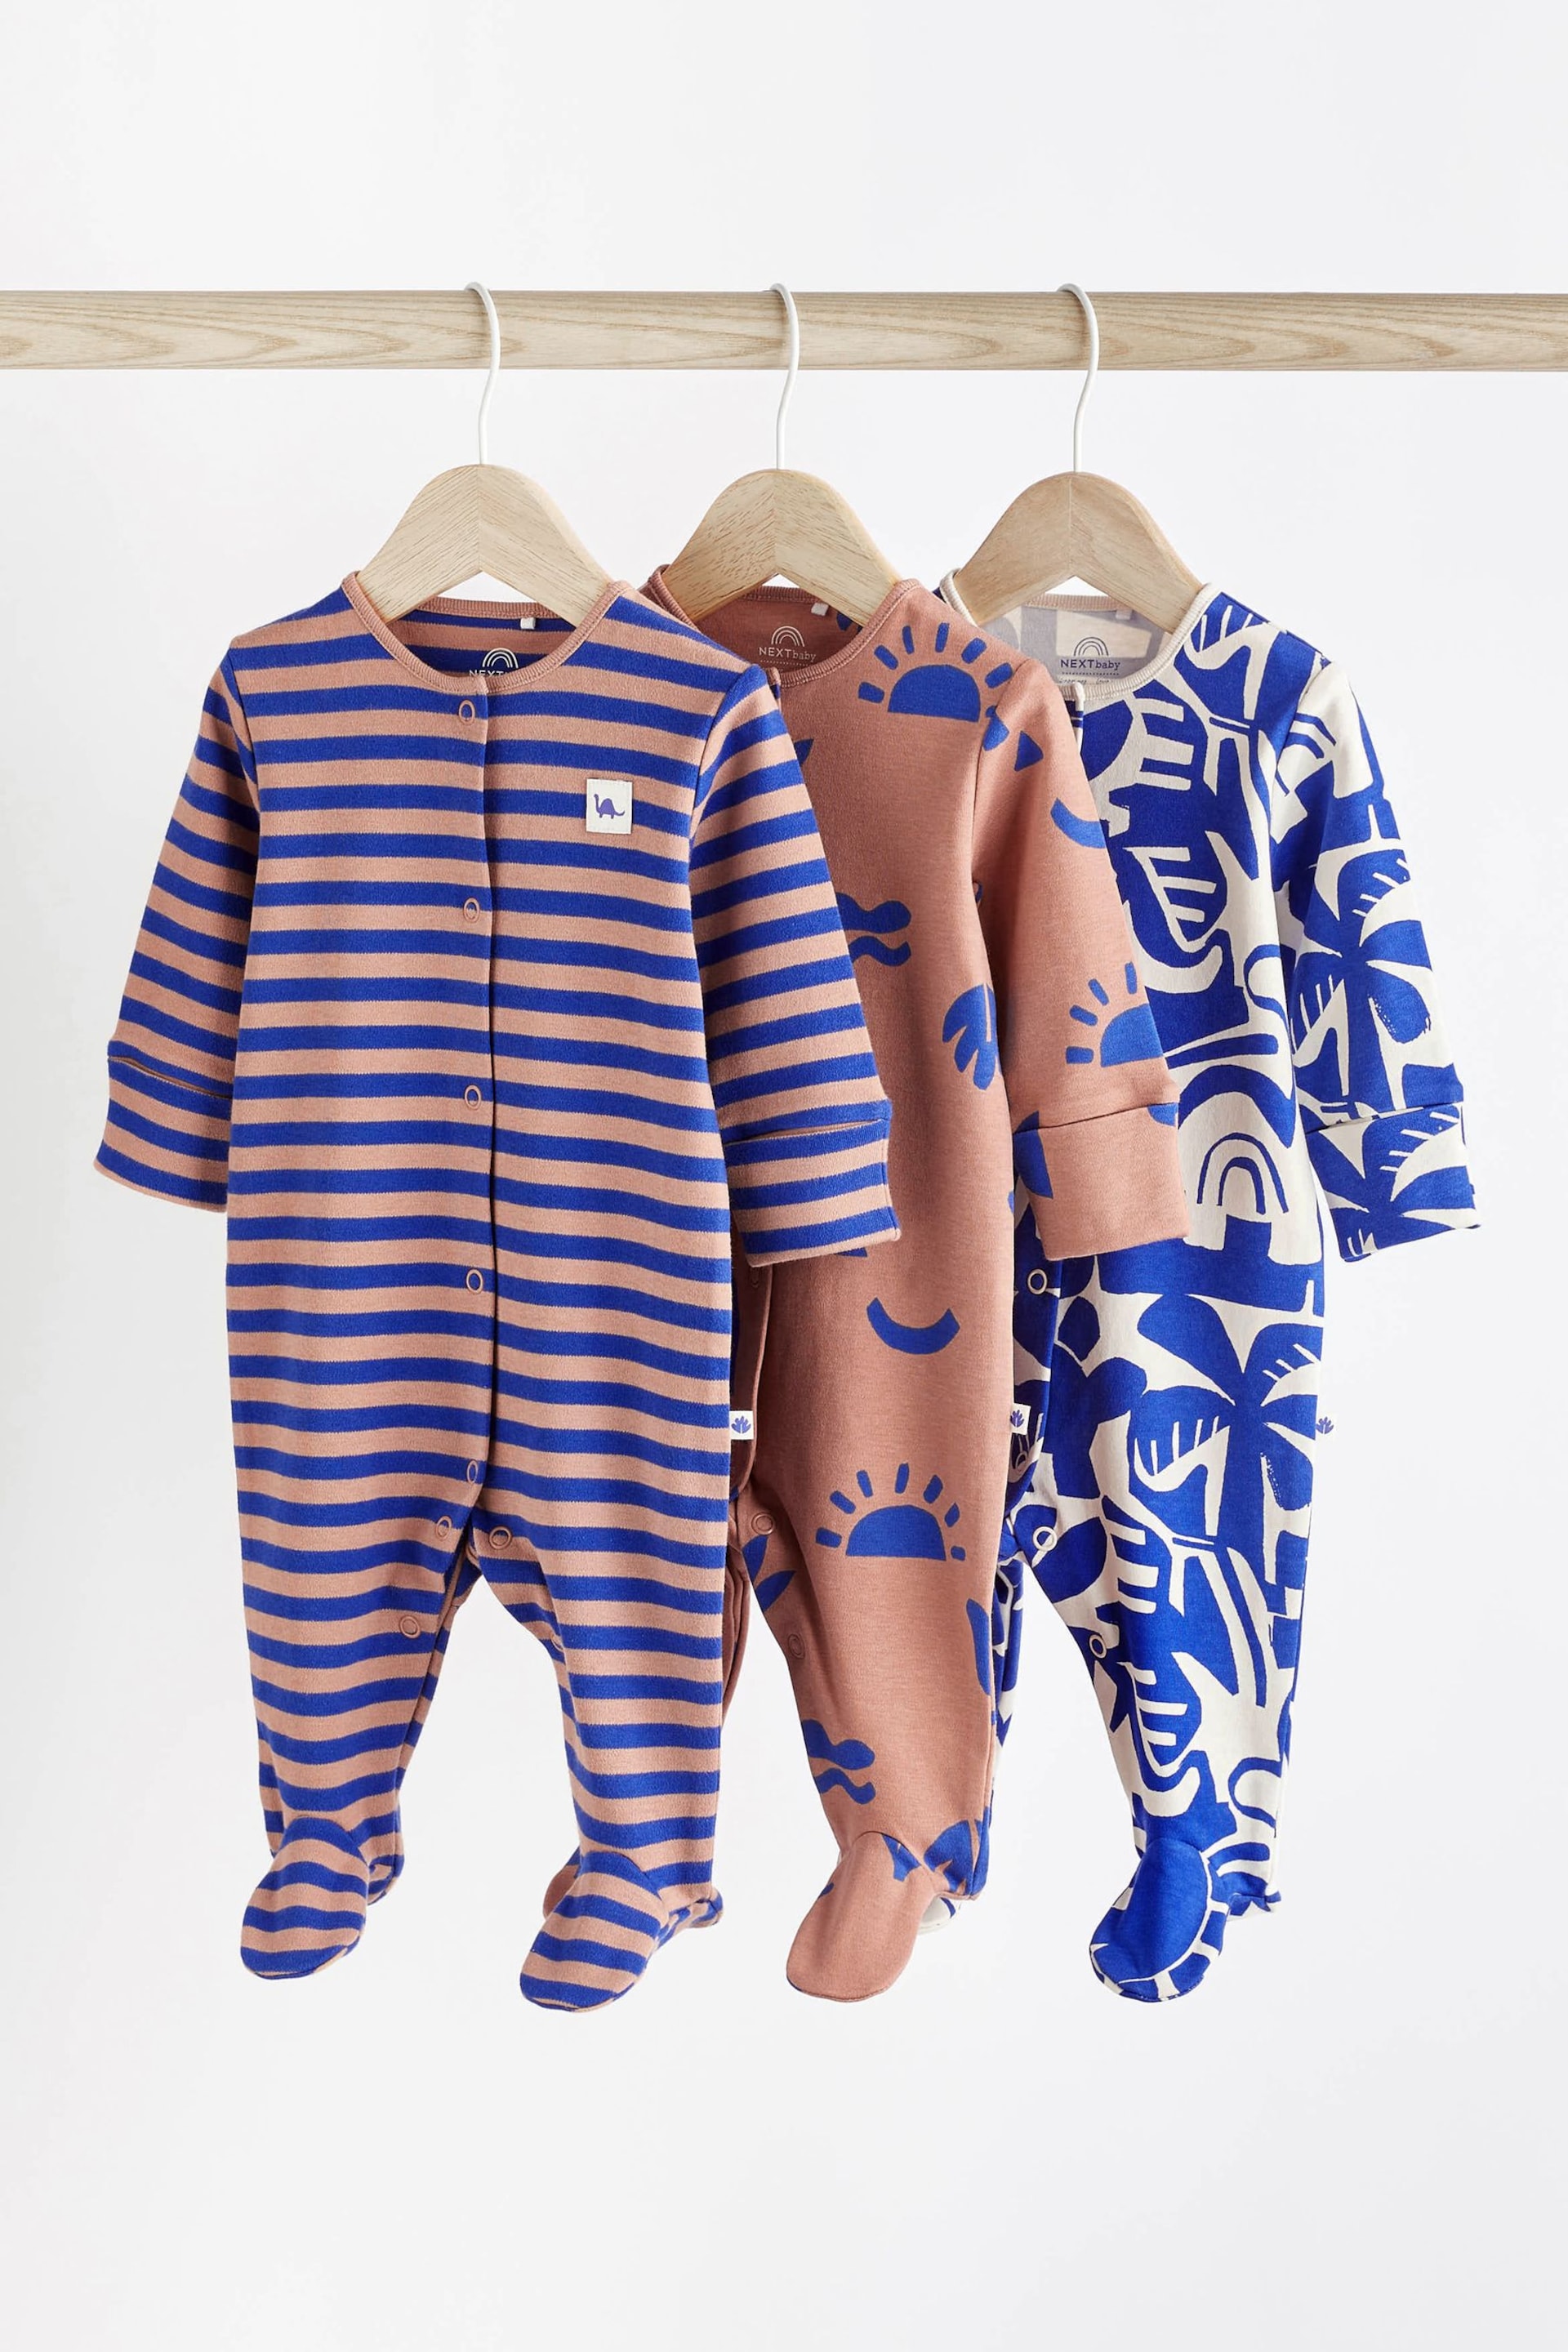 Cobalt Blue Dino Baby Sleepsuits 3 Pack (0mths-3yrs) - Image 1 of 9